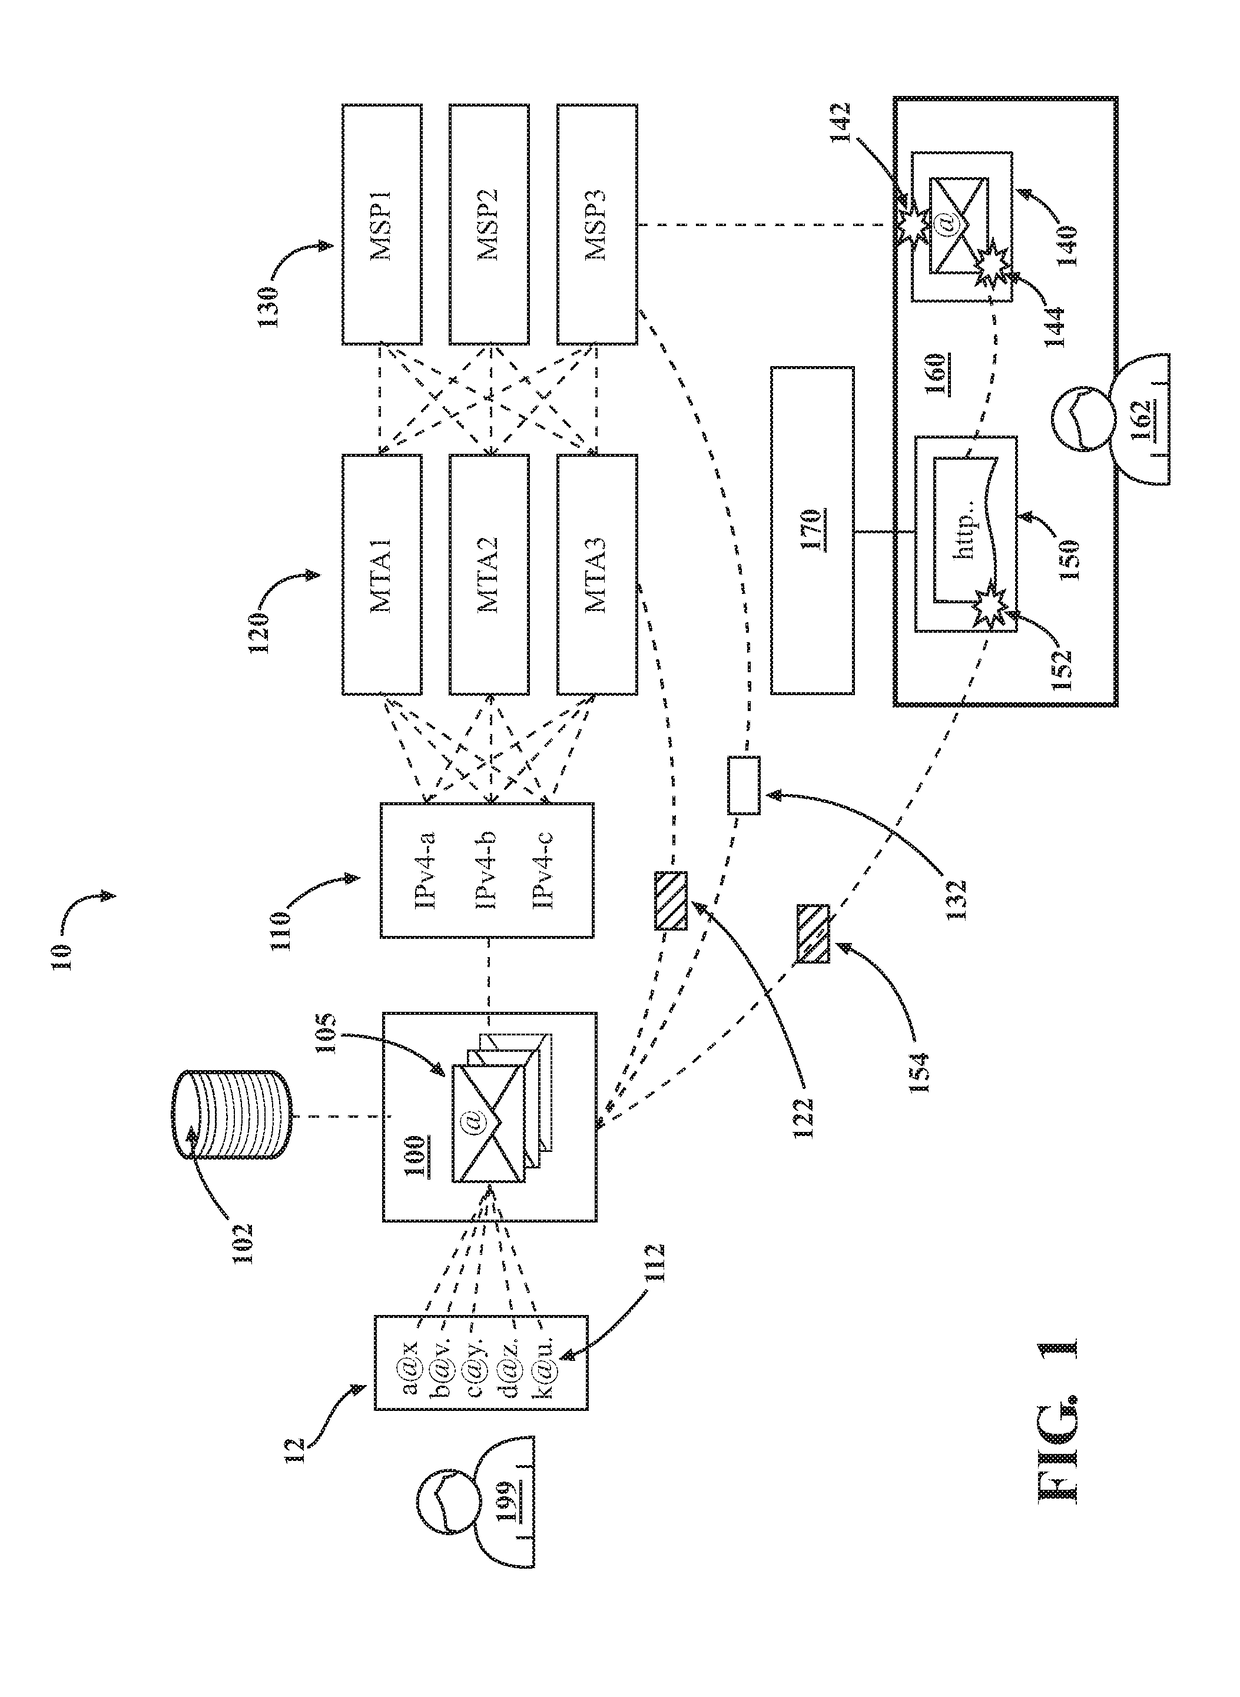 Mitigating abuse in an electronic message delivery environment